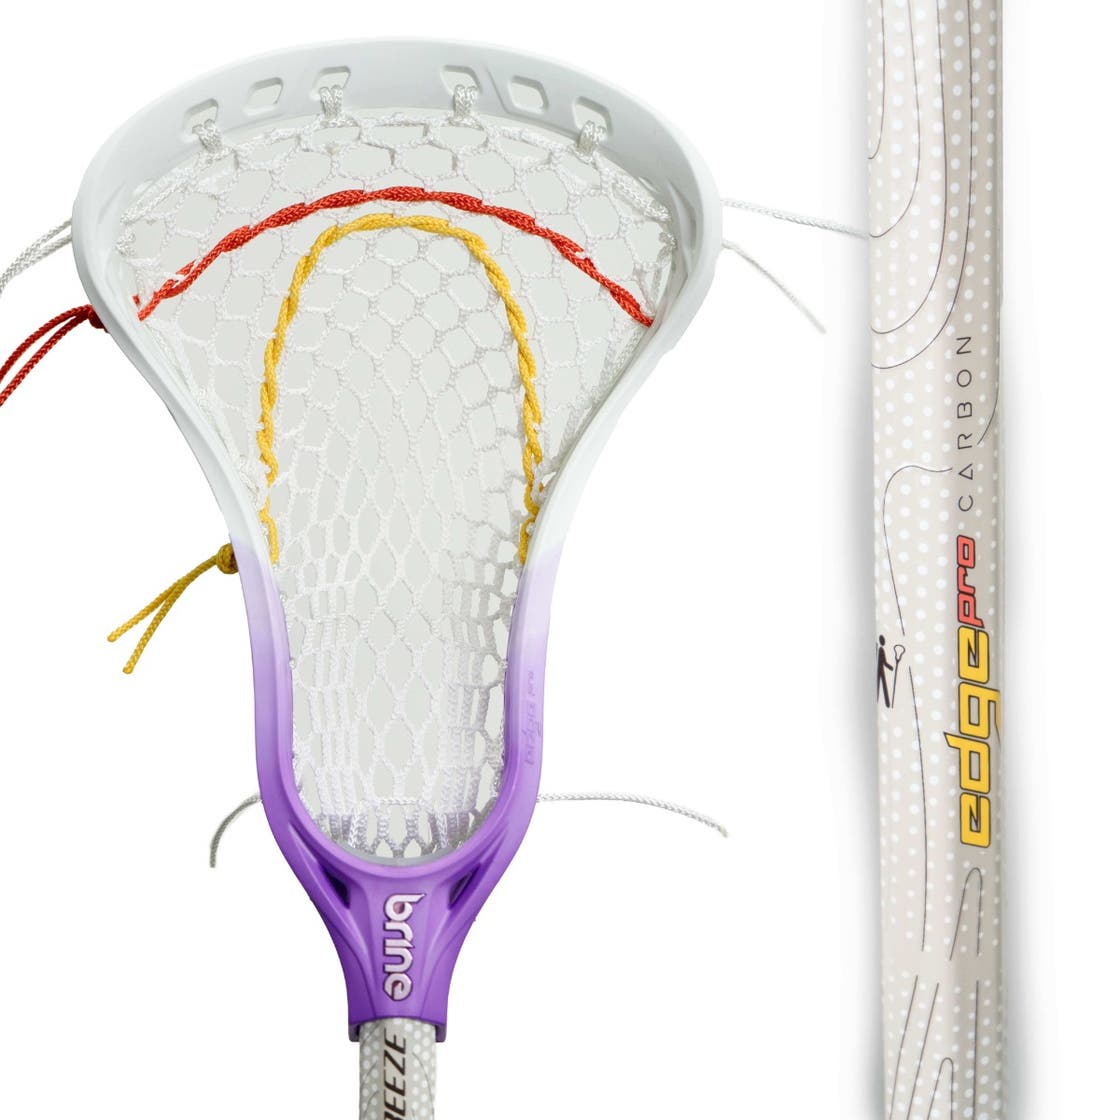 https://www.lacrosseunlimited.com/media/catalog/product/b/r/brine_womens_complete_main_1_.jpg?optimize=high&fit=bounds&height=1120&width=1120